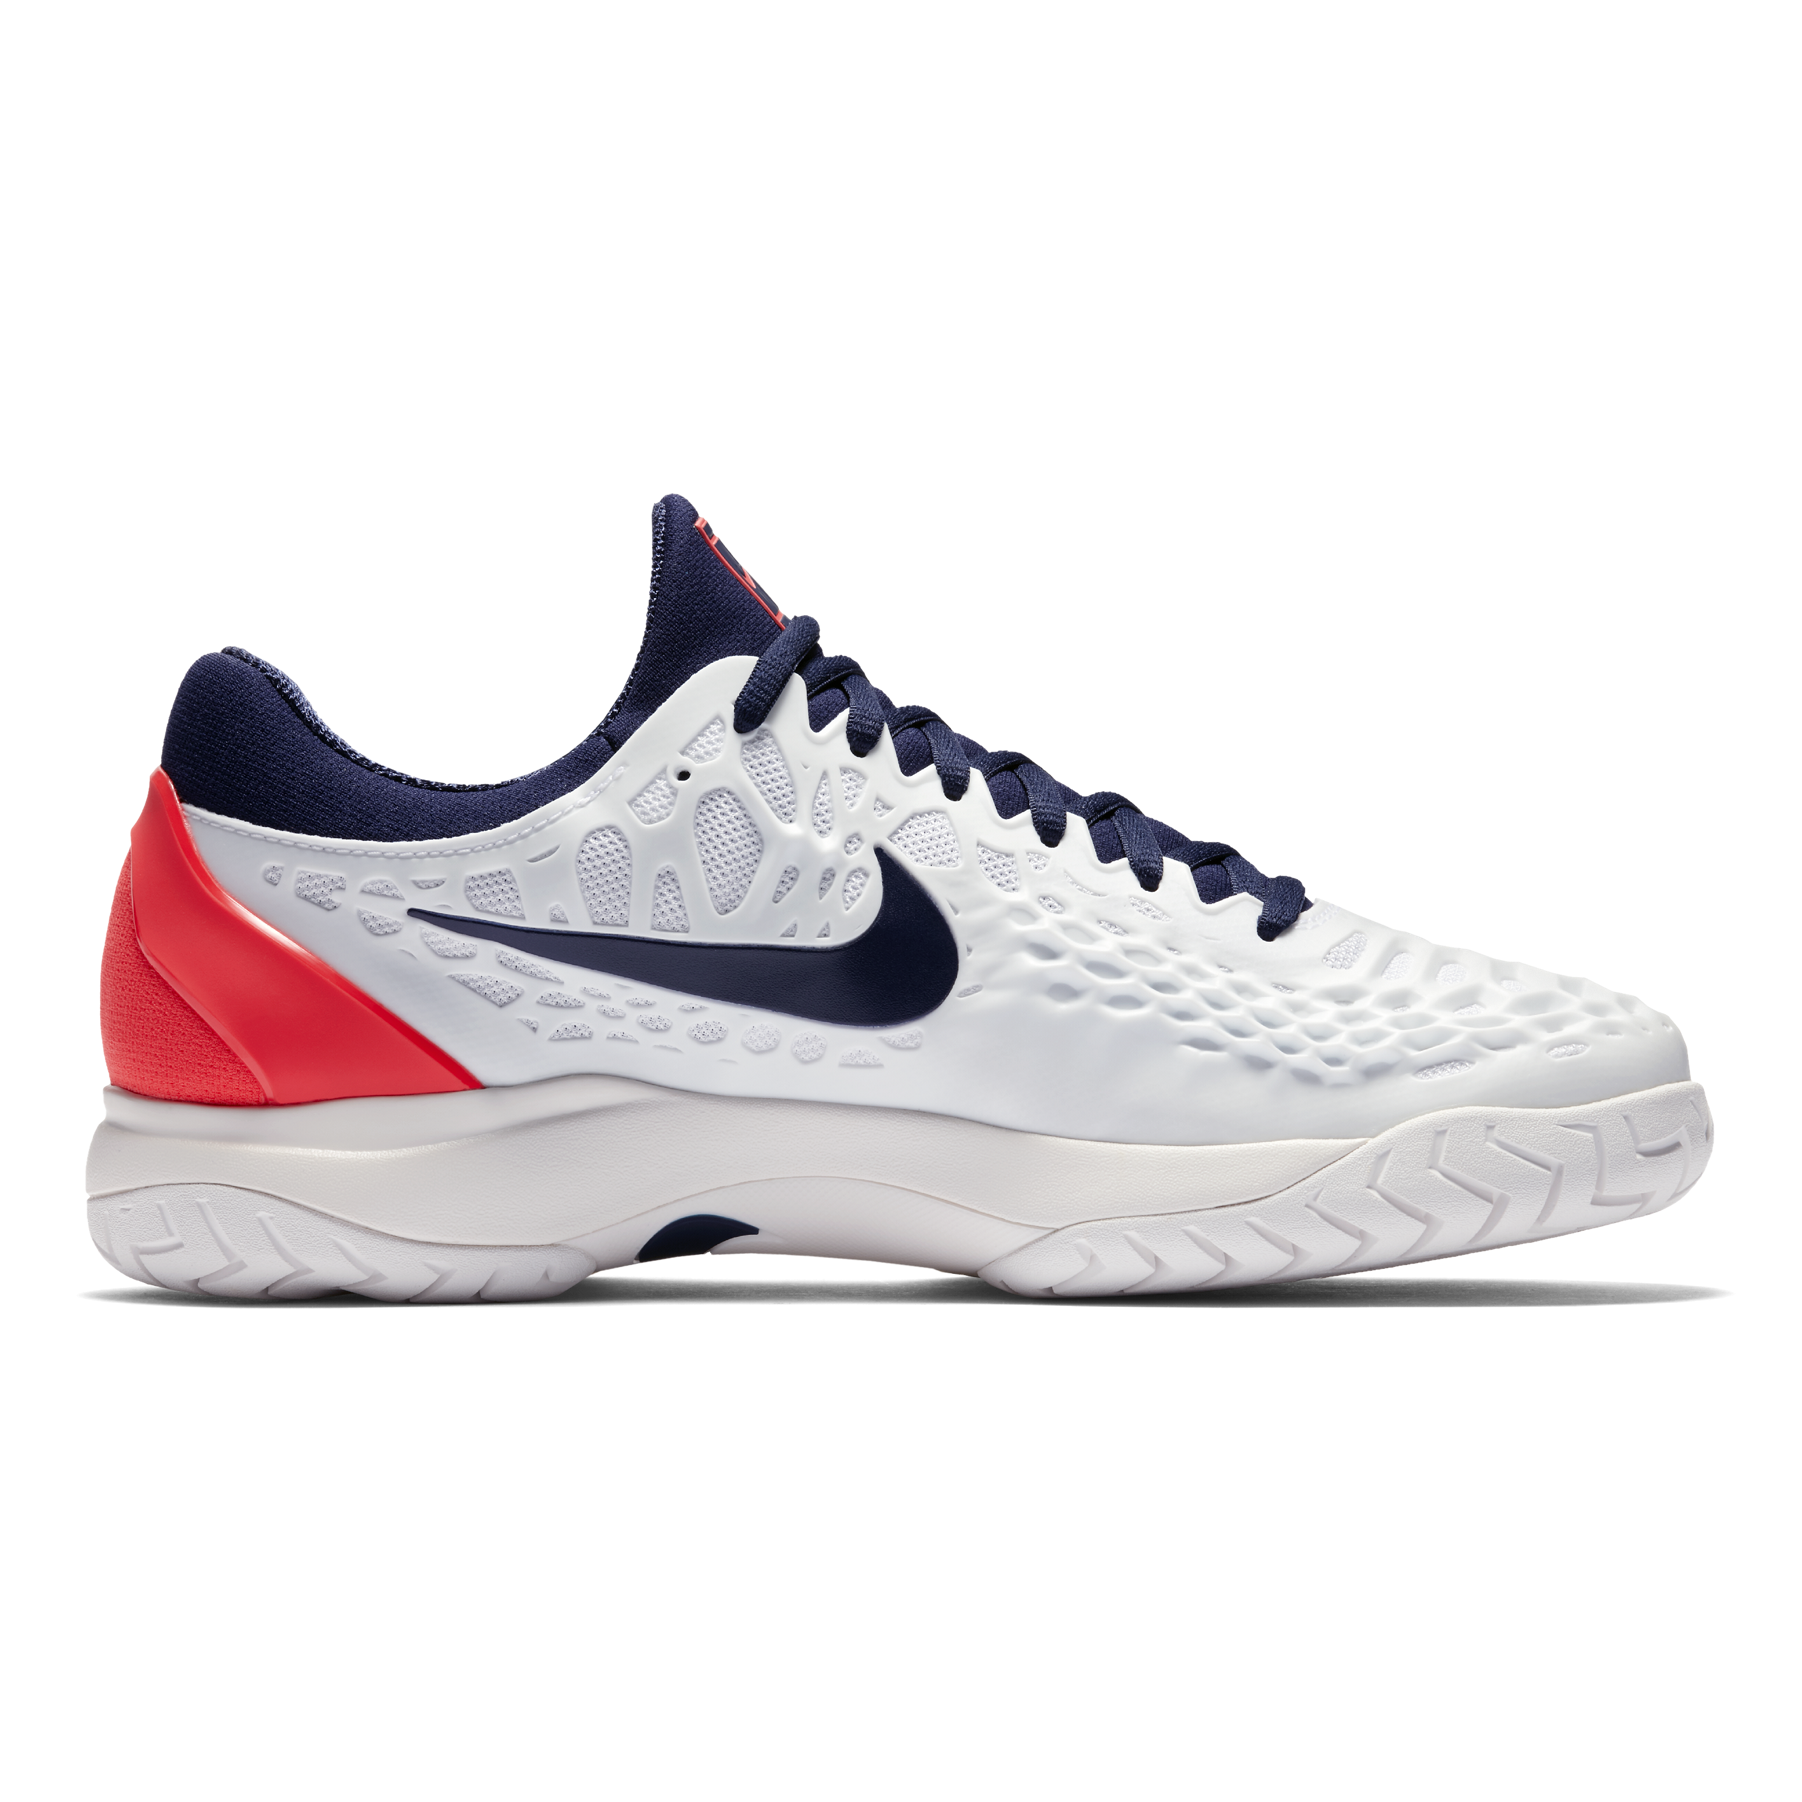 navy and orange tennis shoes